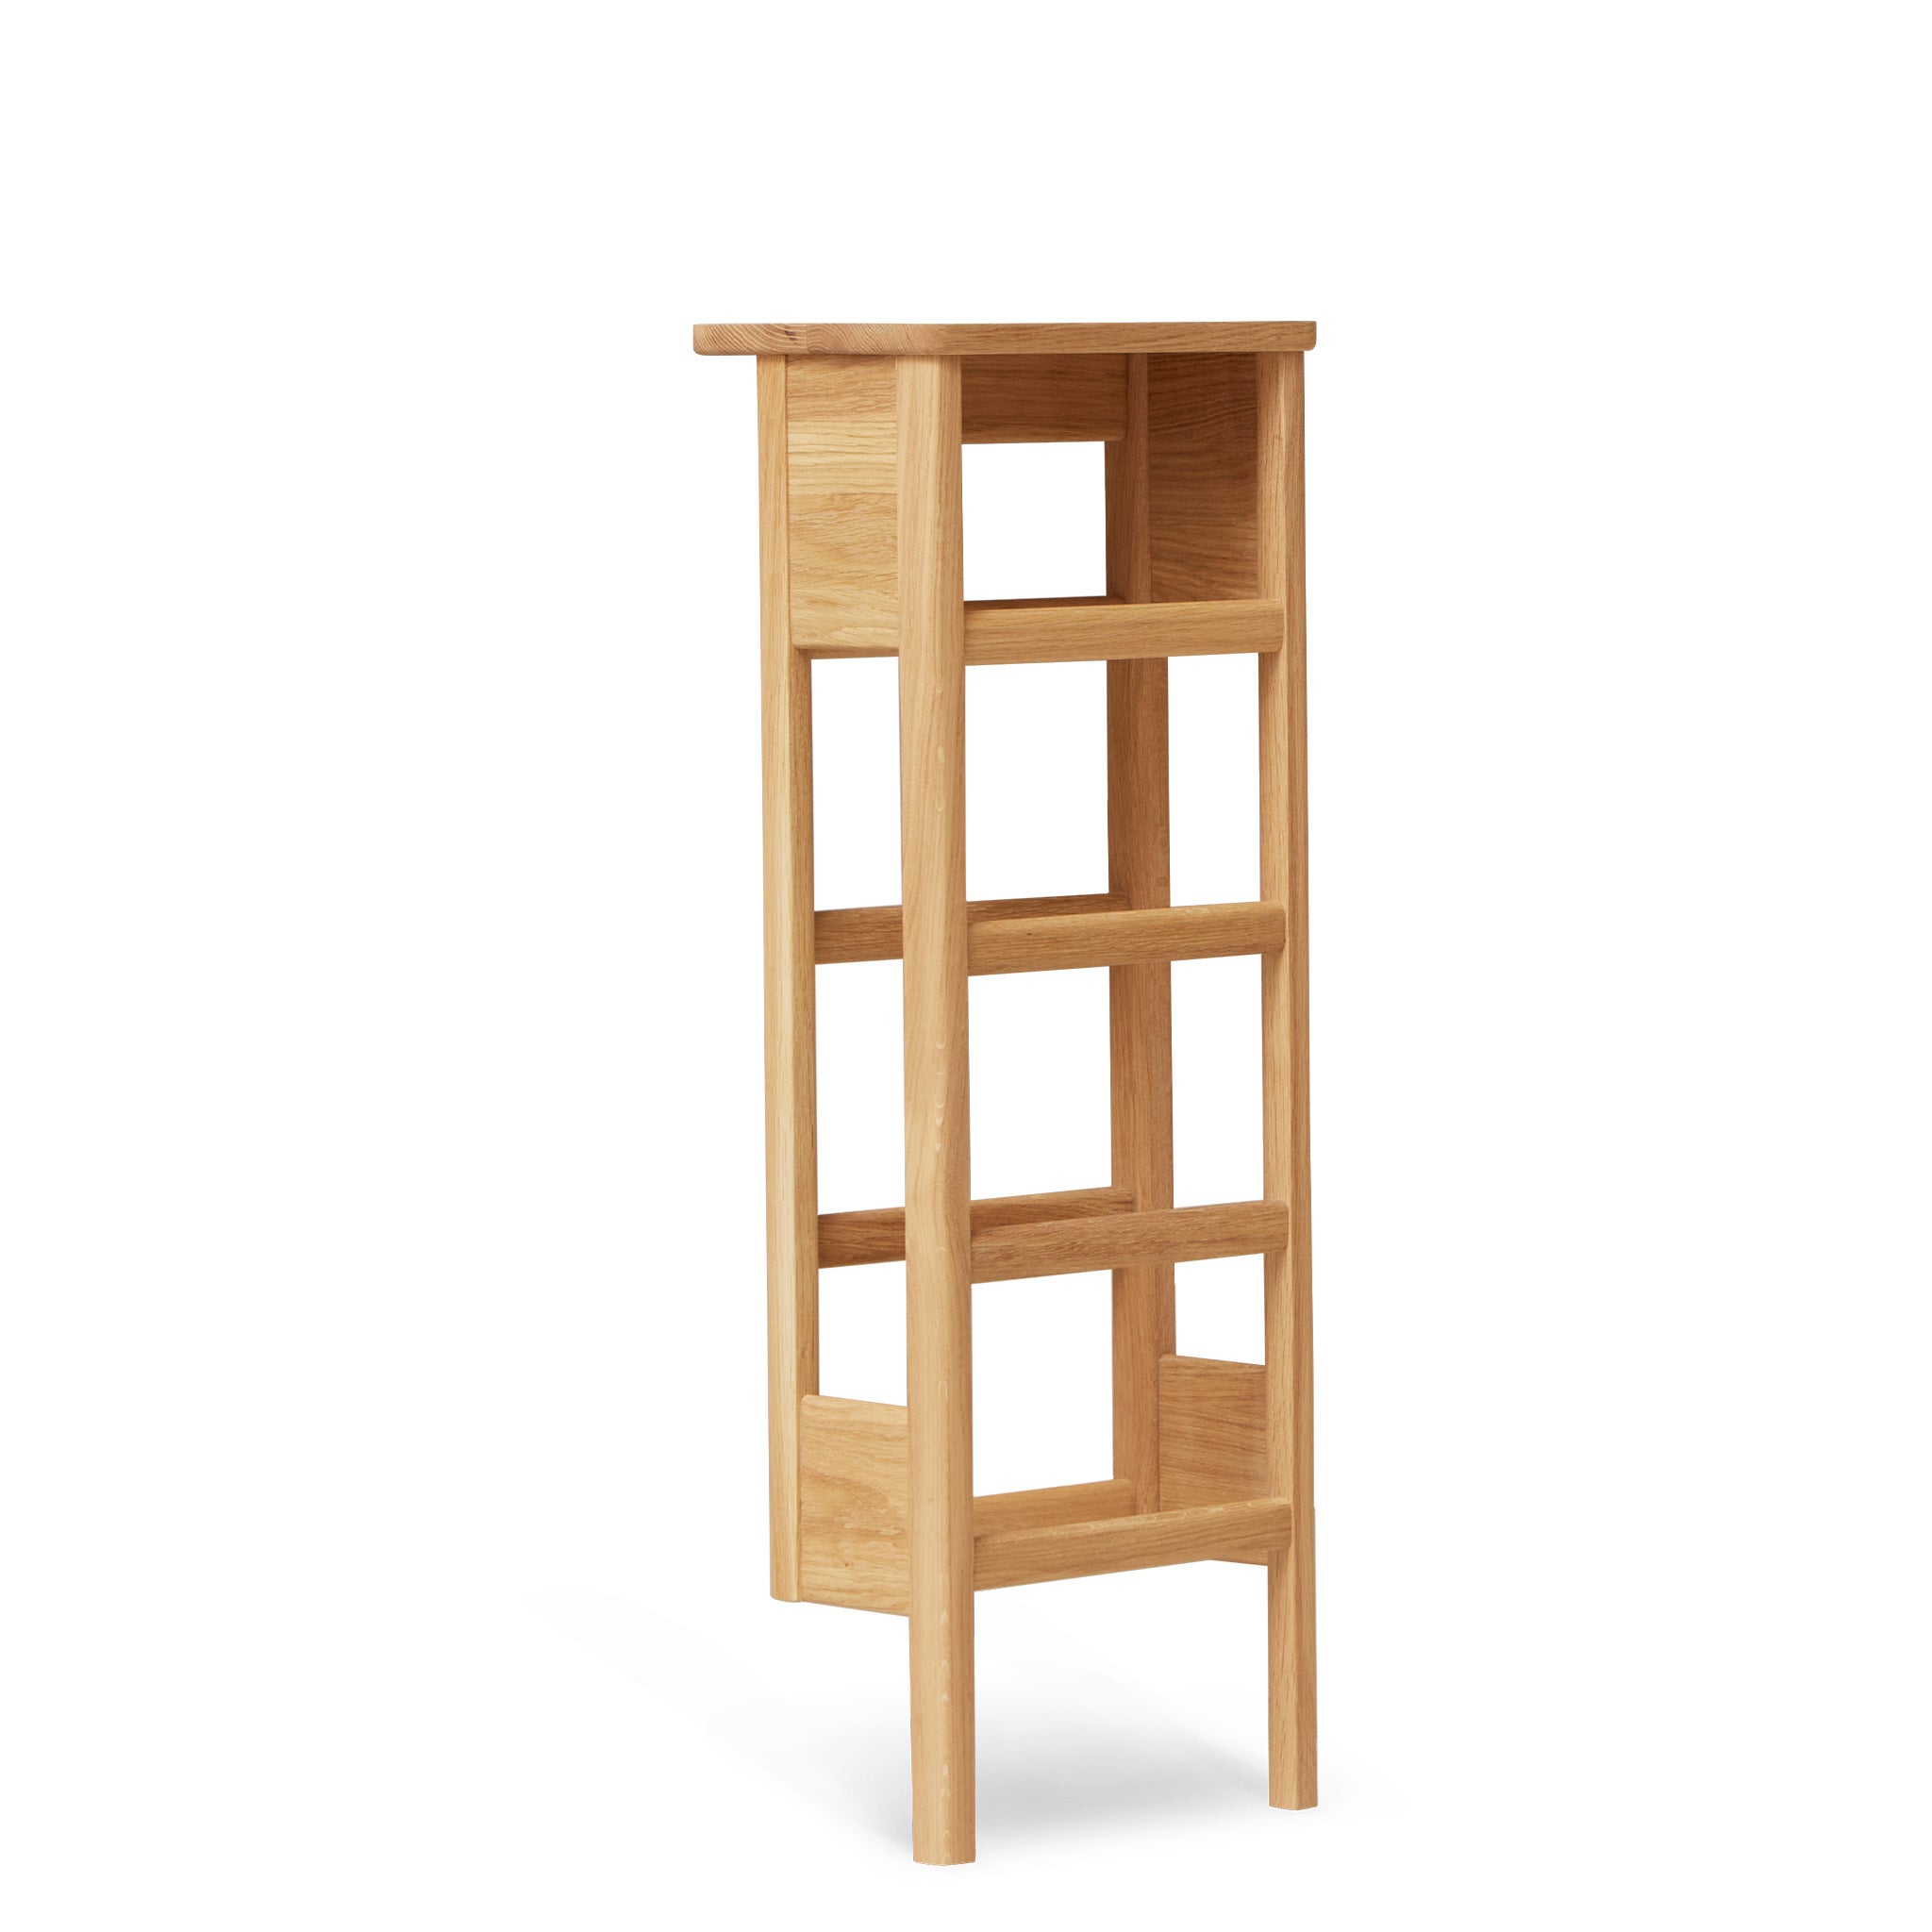 A Line Shoe Rack 35 by Form and Refine